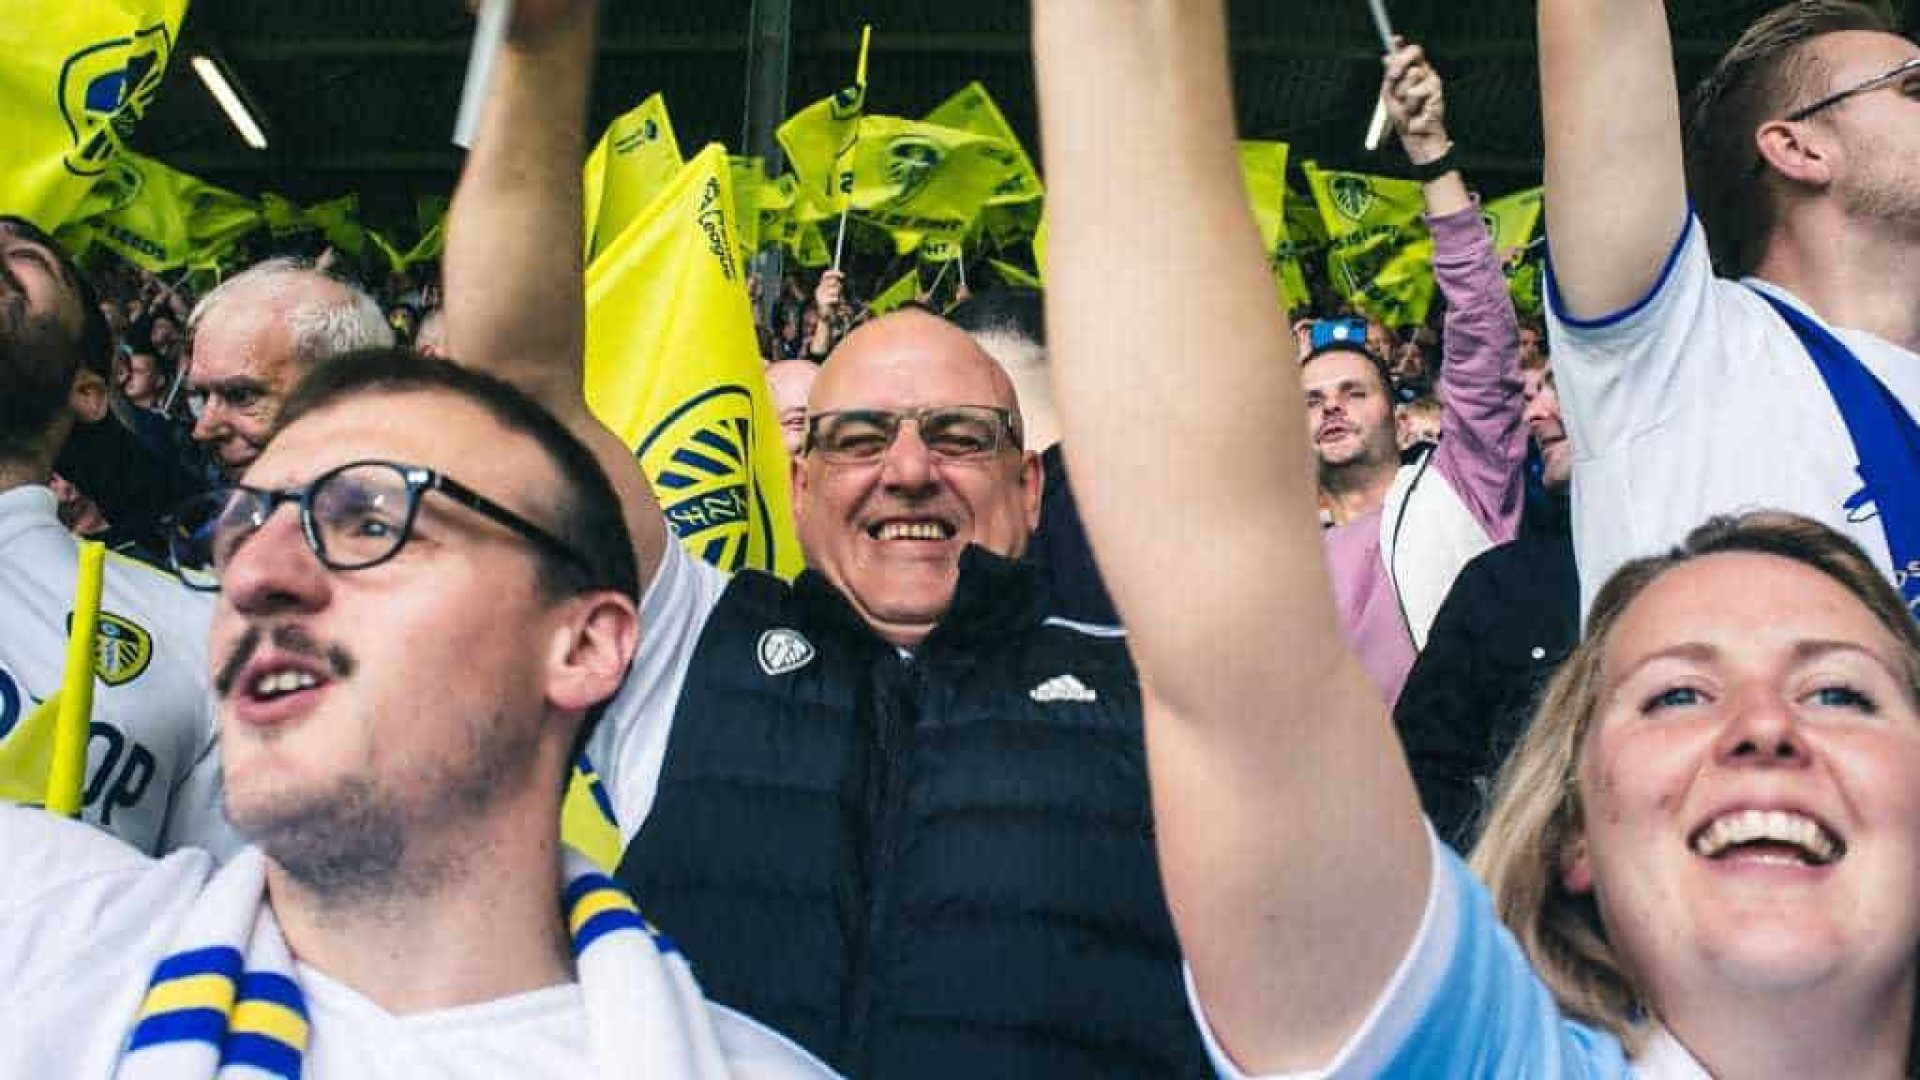 Leeds fans waving flags on the Kop against Everton. The one bloke in the middle of this shot is loving it, they all are!